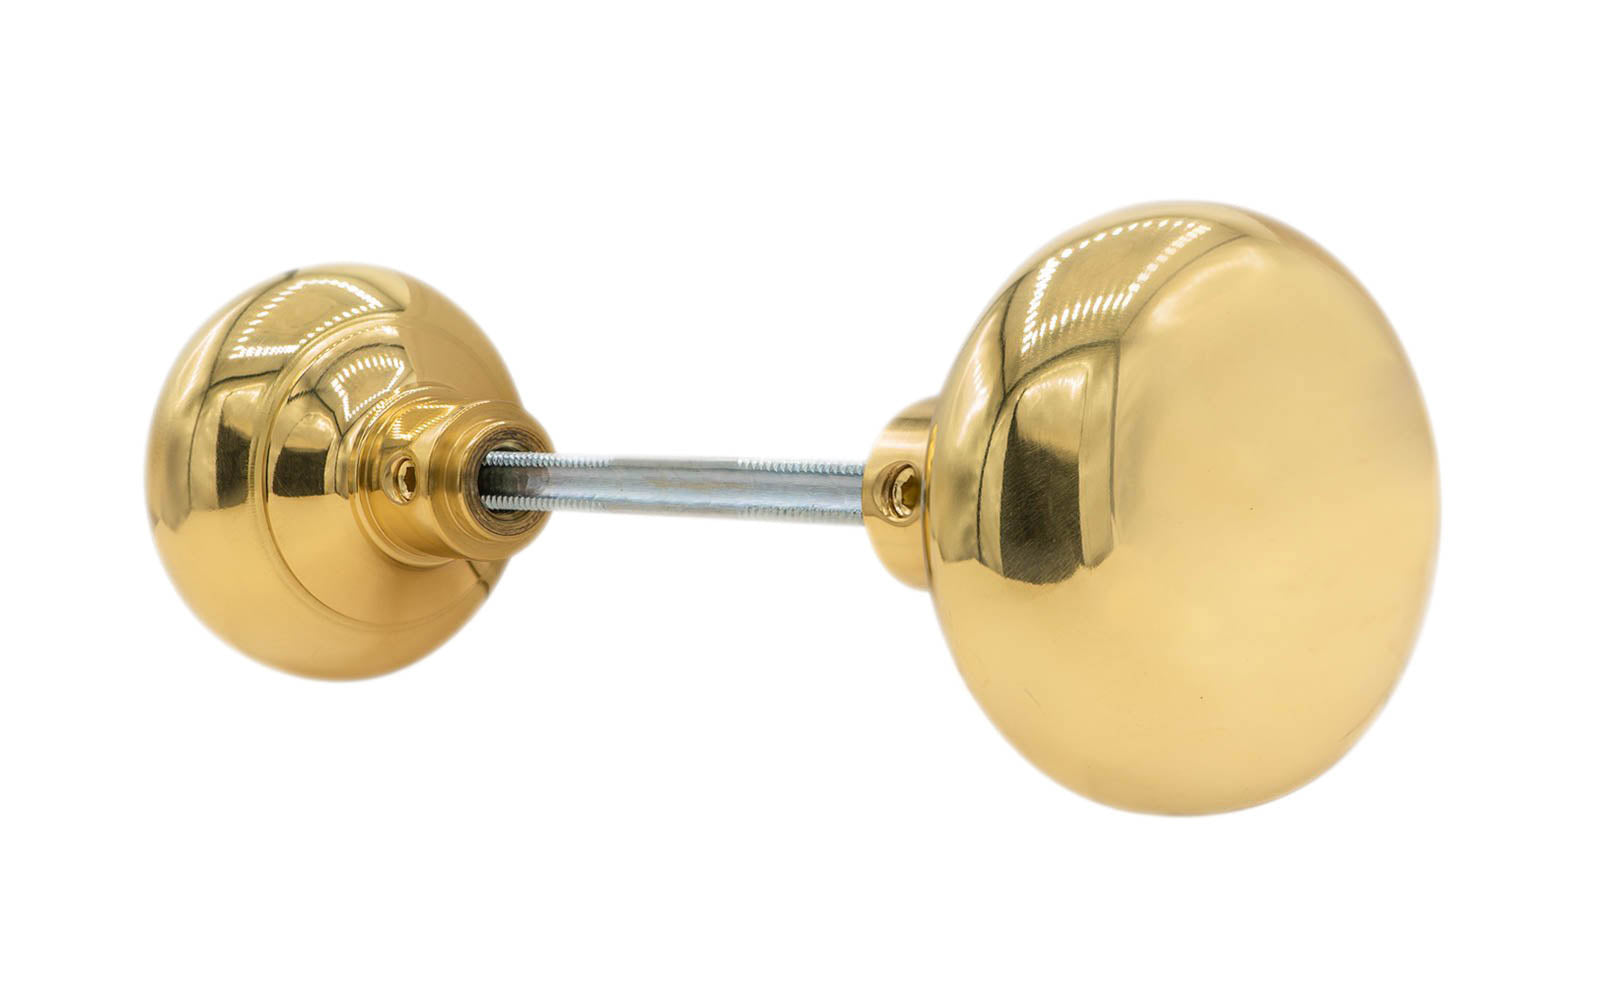 Solid Brass Core Classic Smooth Doorknob Set. Vintage-style Hardware · High quality & solid brass doorknob set with a classic & smooth design. The doorknob itself has a solid brass core making it very durable. Lacquered Brass Finish